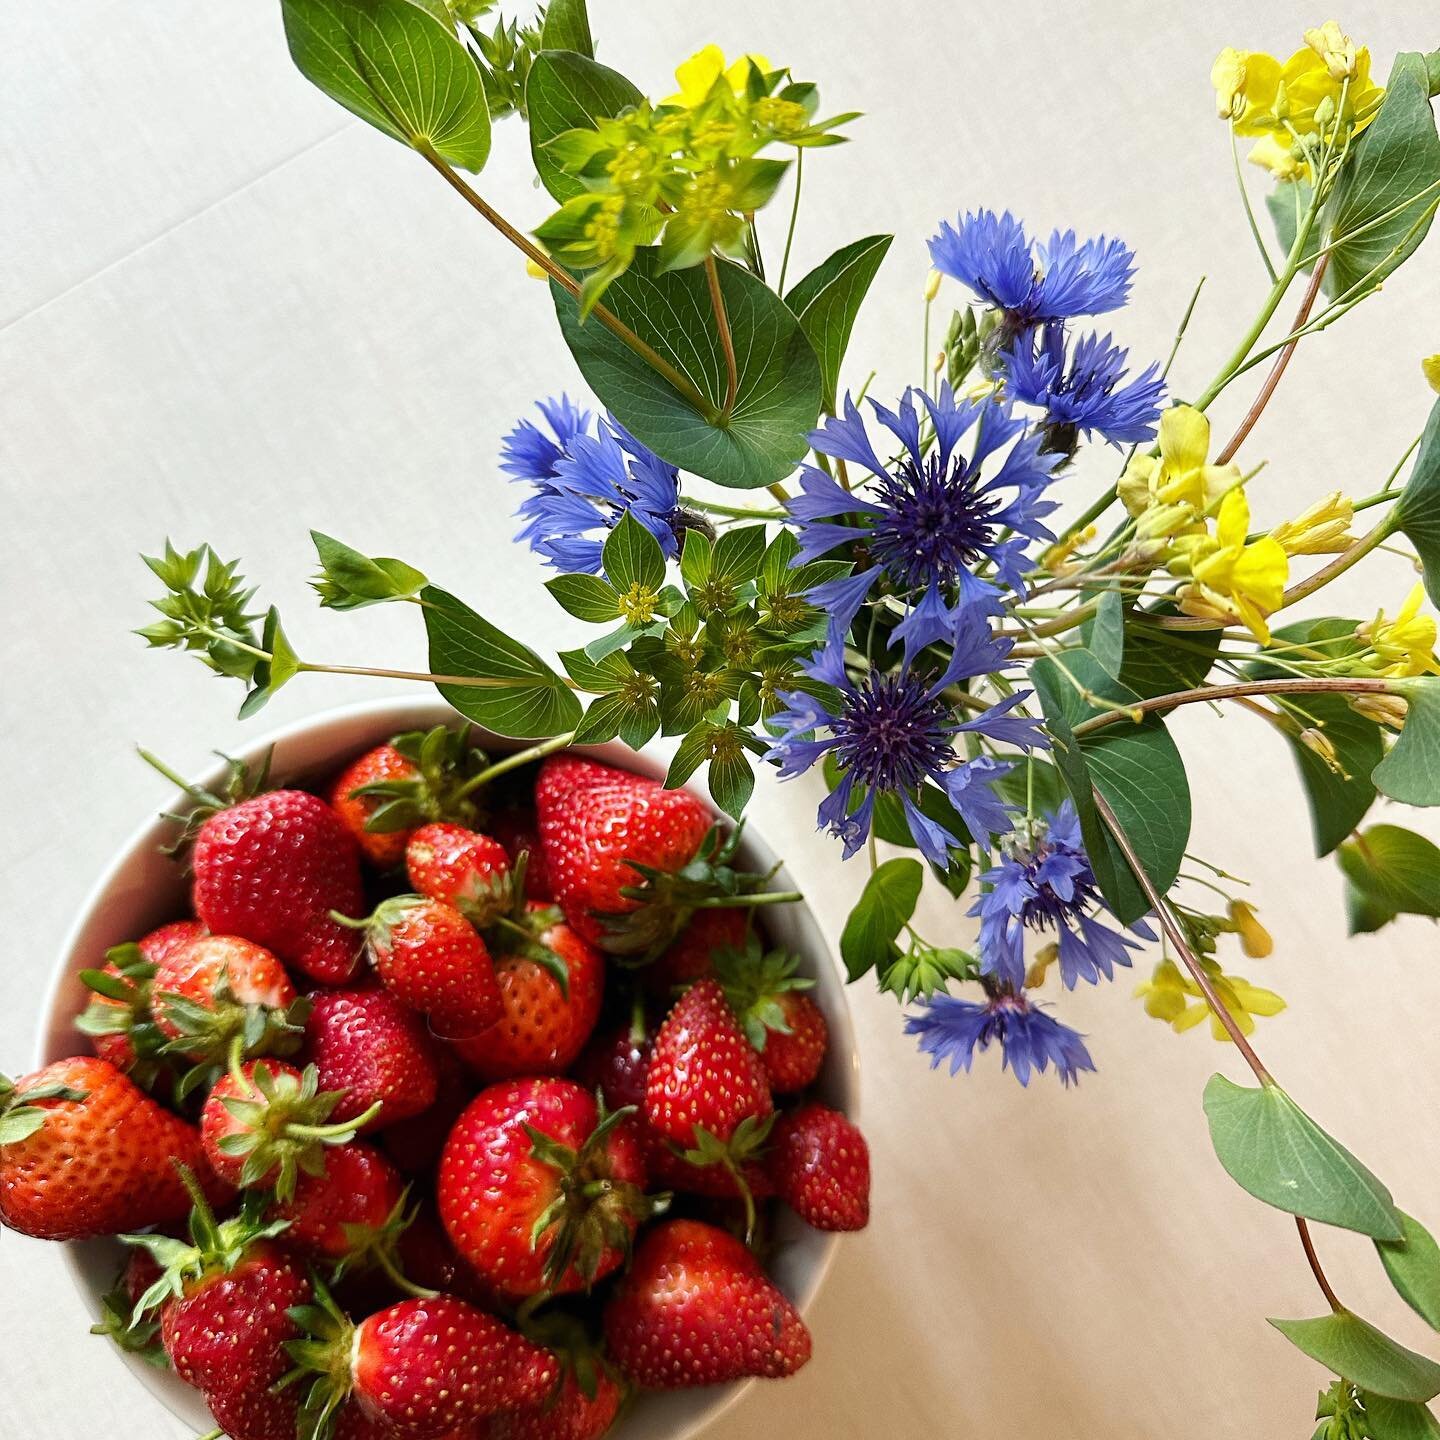 Today&rsquo;s harvest! Just like that, it&rsquo;s strawberry and cut-flower season. 😍 I grow everbearing strawberries in my kitchen garden and look forward to harvesting throughout the summer and into fall! The yellow flowers are from my bolted arug